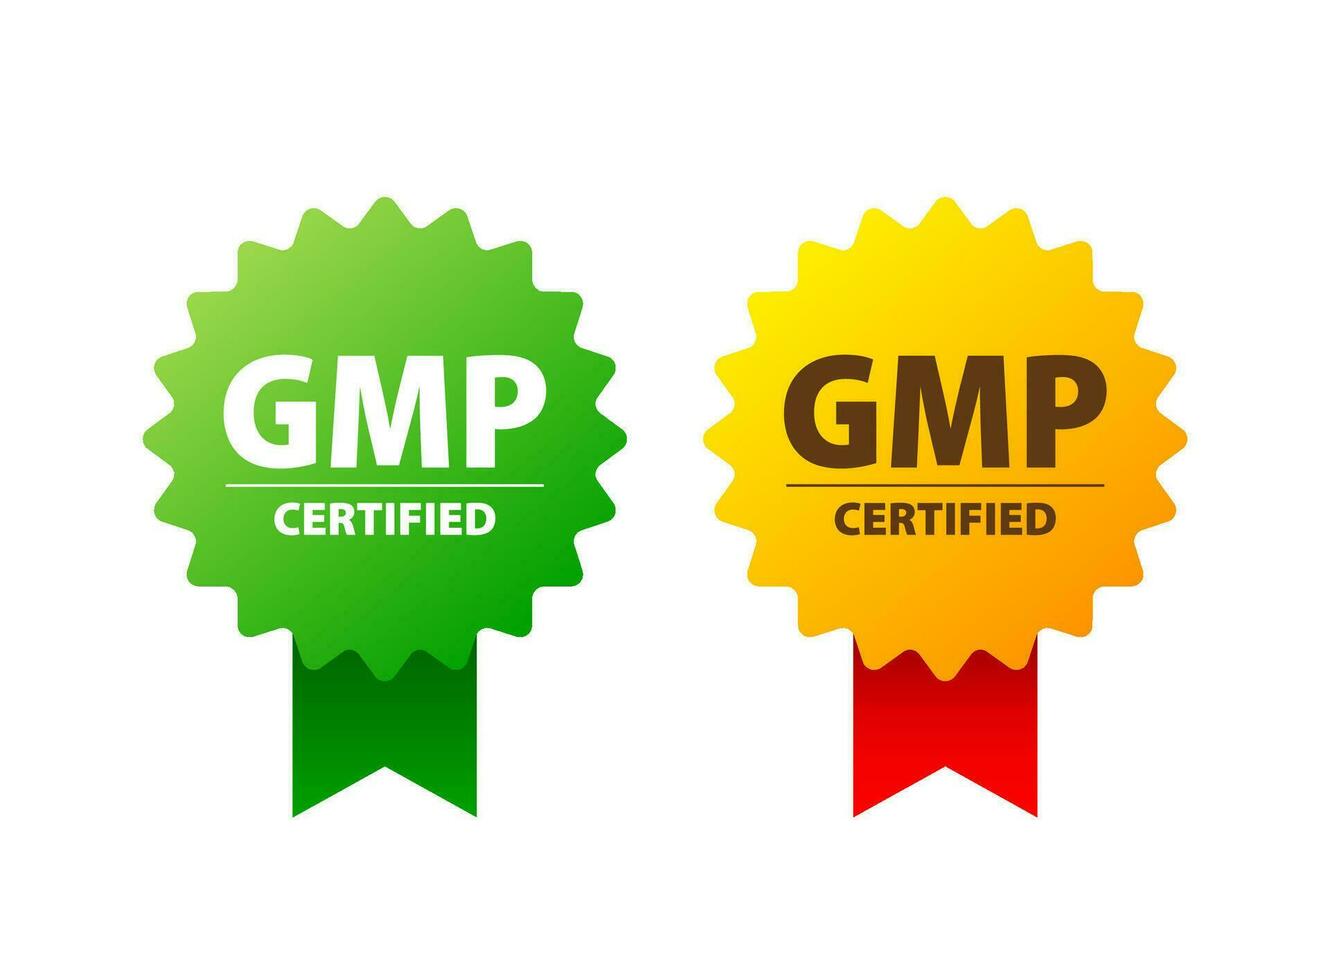 GMP - Good Manufacturing Practice certified sign, label. vector